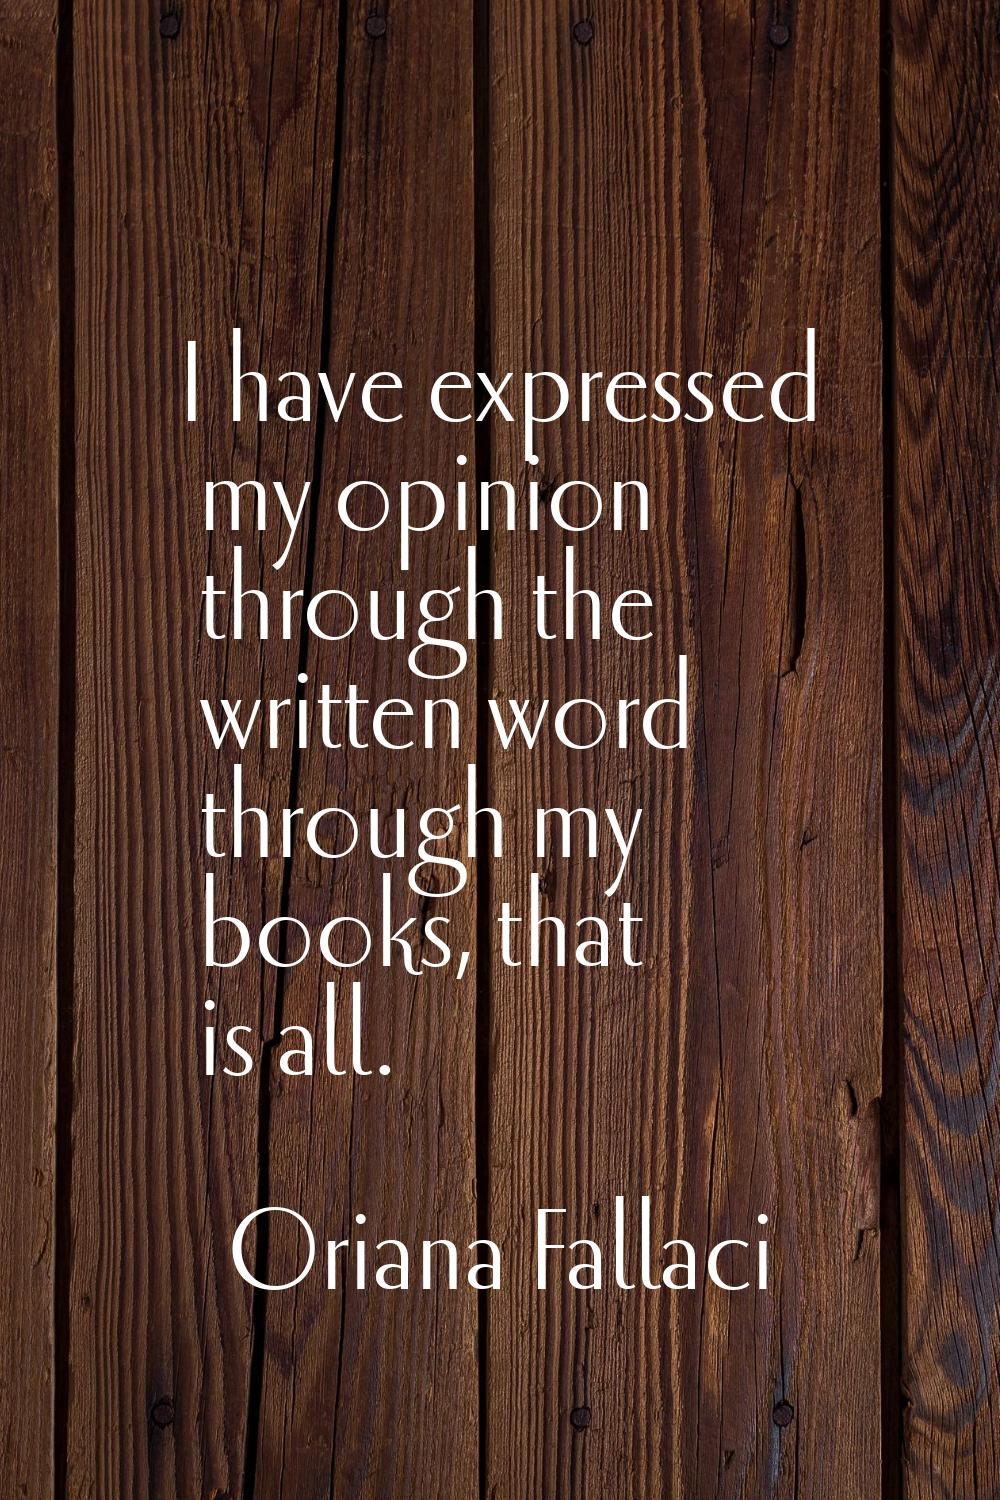 I have expressed my opinion through the written word through my books, that is all.